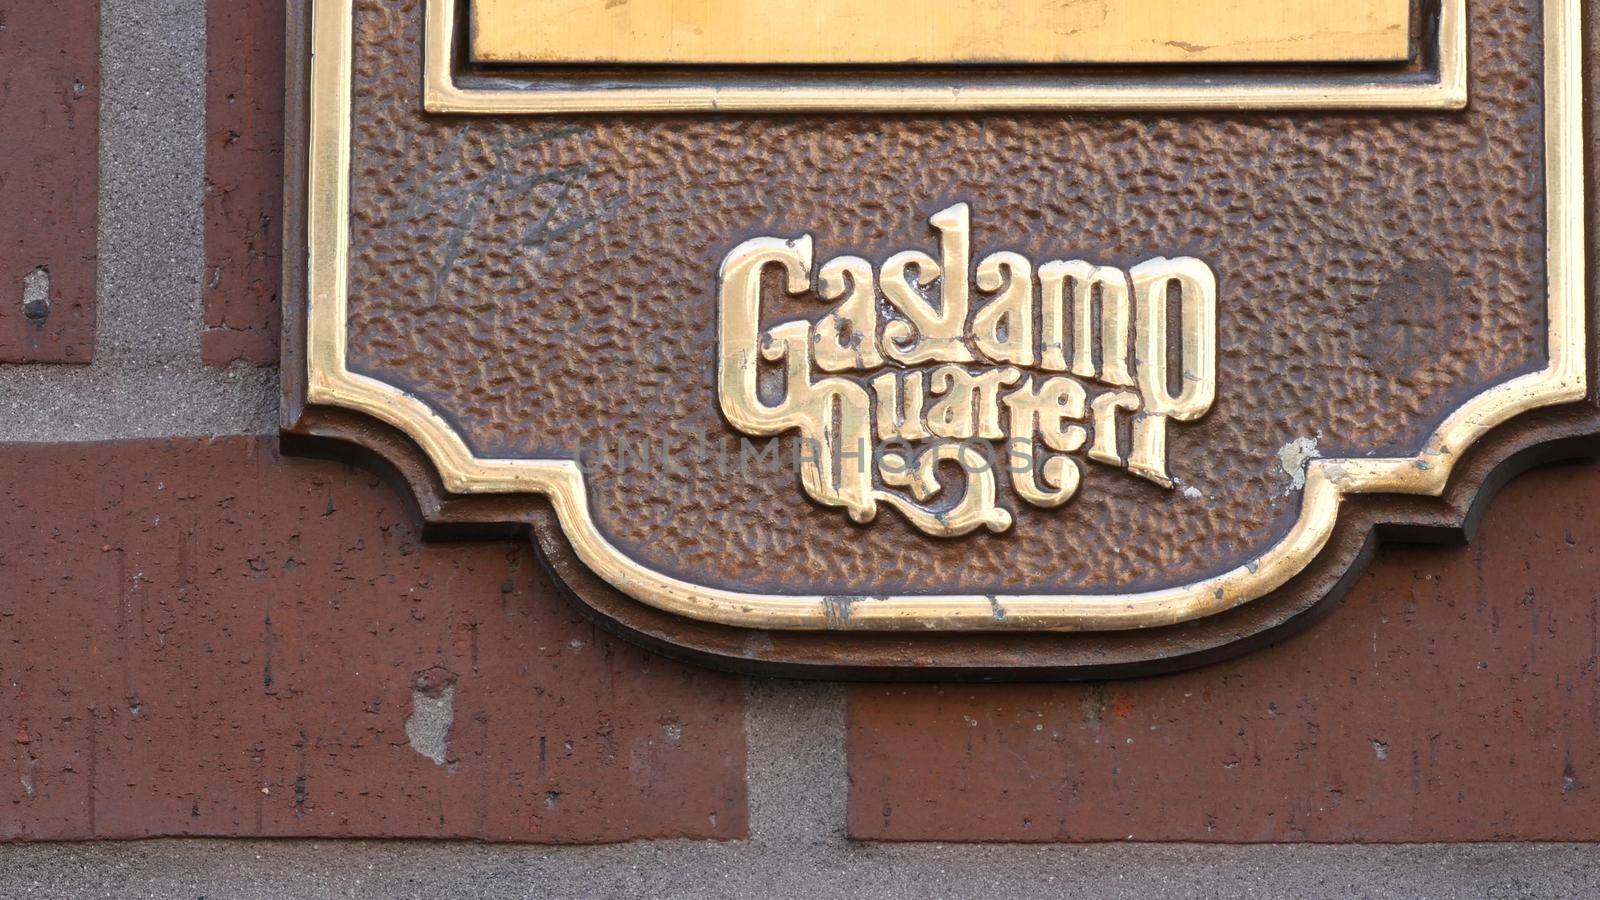 SAN DIEGO, CALIFORNIA USA - 13 FEB 2020: Historic old-fashioned Gaslamp Quarter sign on building wall. Retro signboard on 5th ave. Iconic vintage nameplate signage. Tourist landmark and sightseeing by DogoraSun